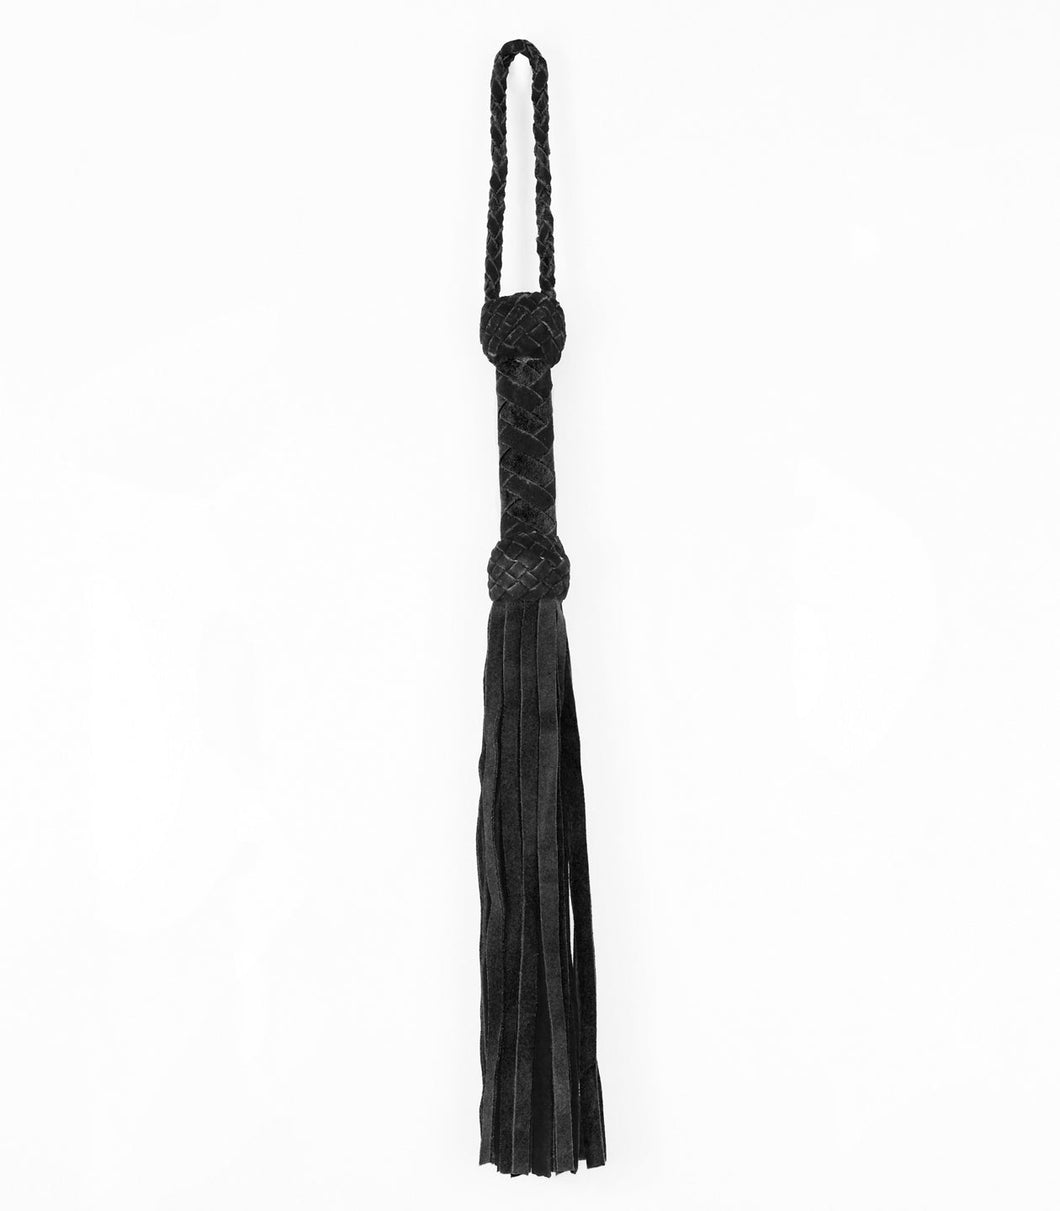 Suede Leather Whip with Turks Head Handle - Black 46cm